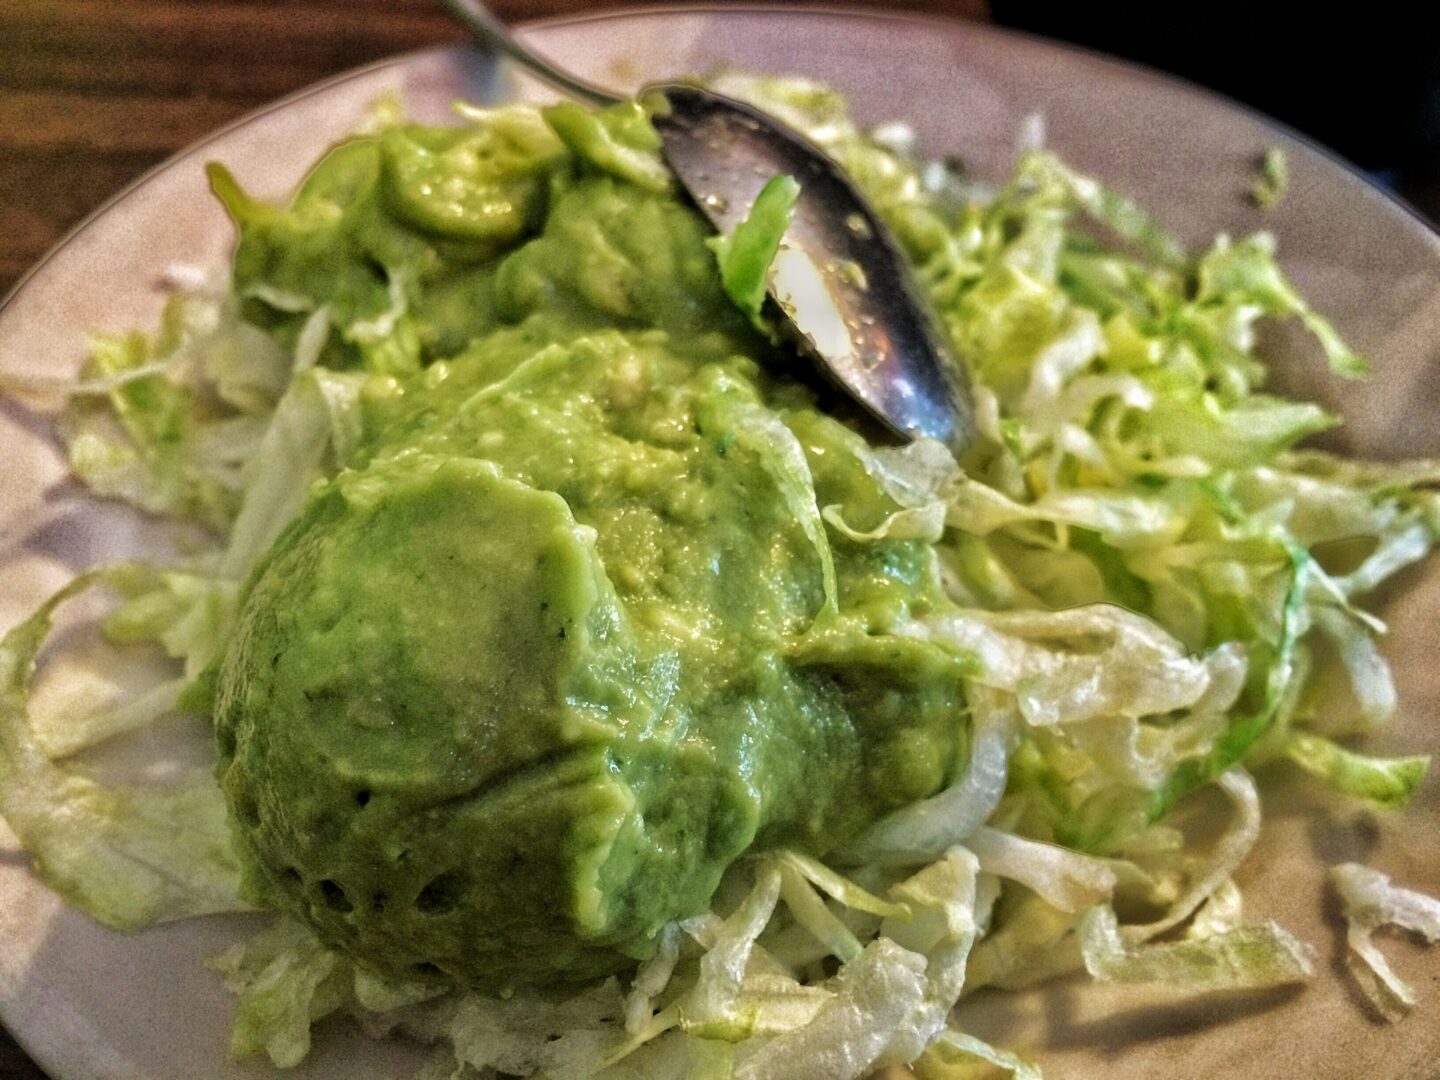 A plate of guacamole on a wooden table.